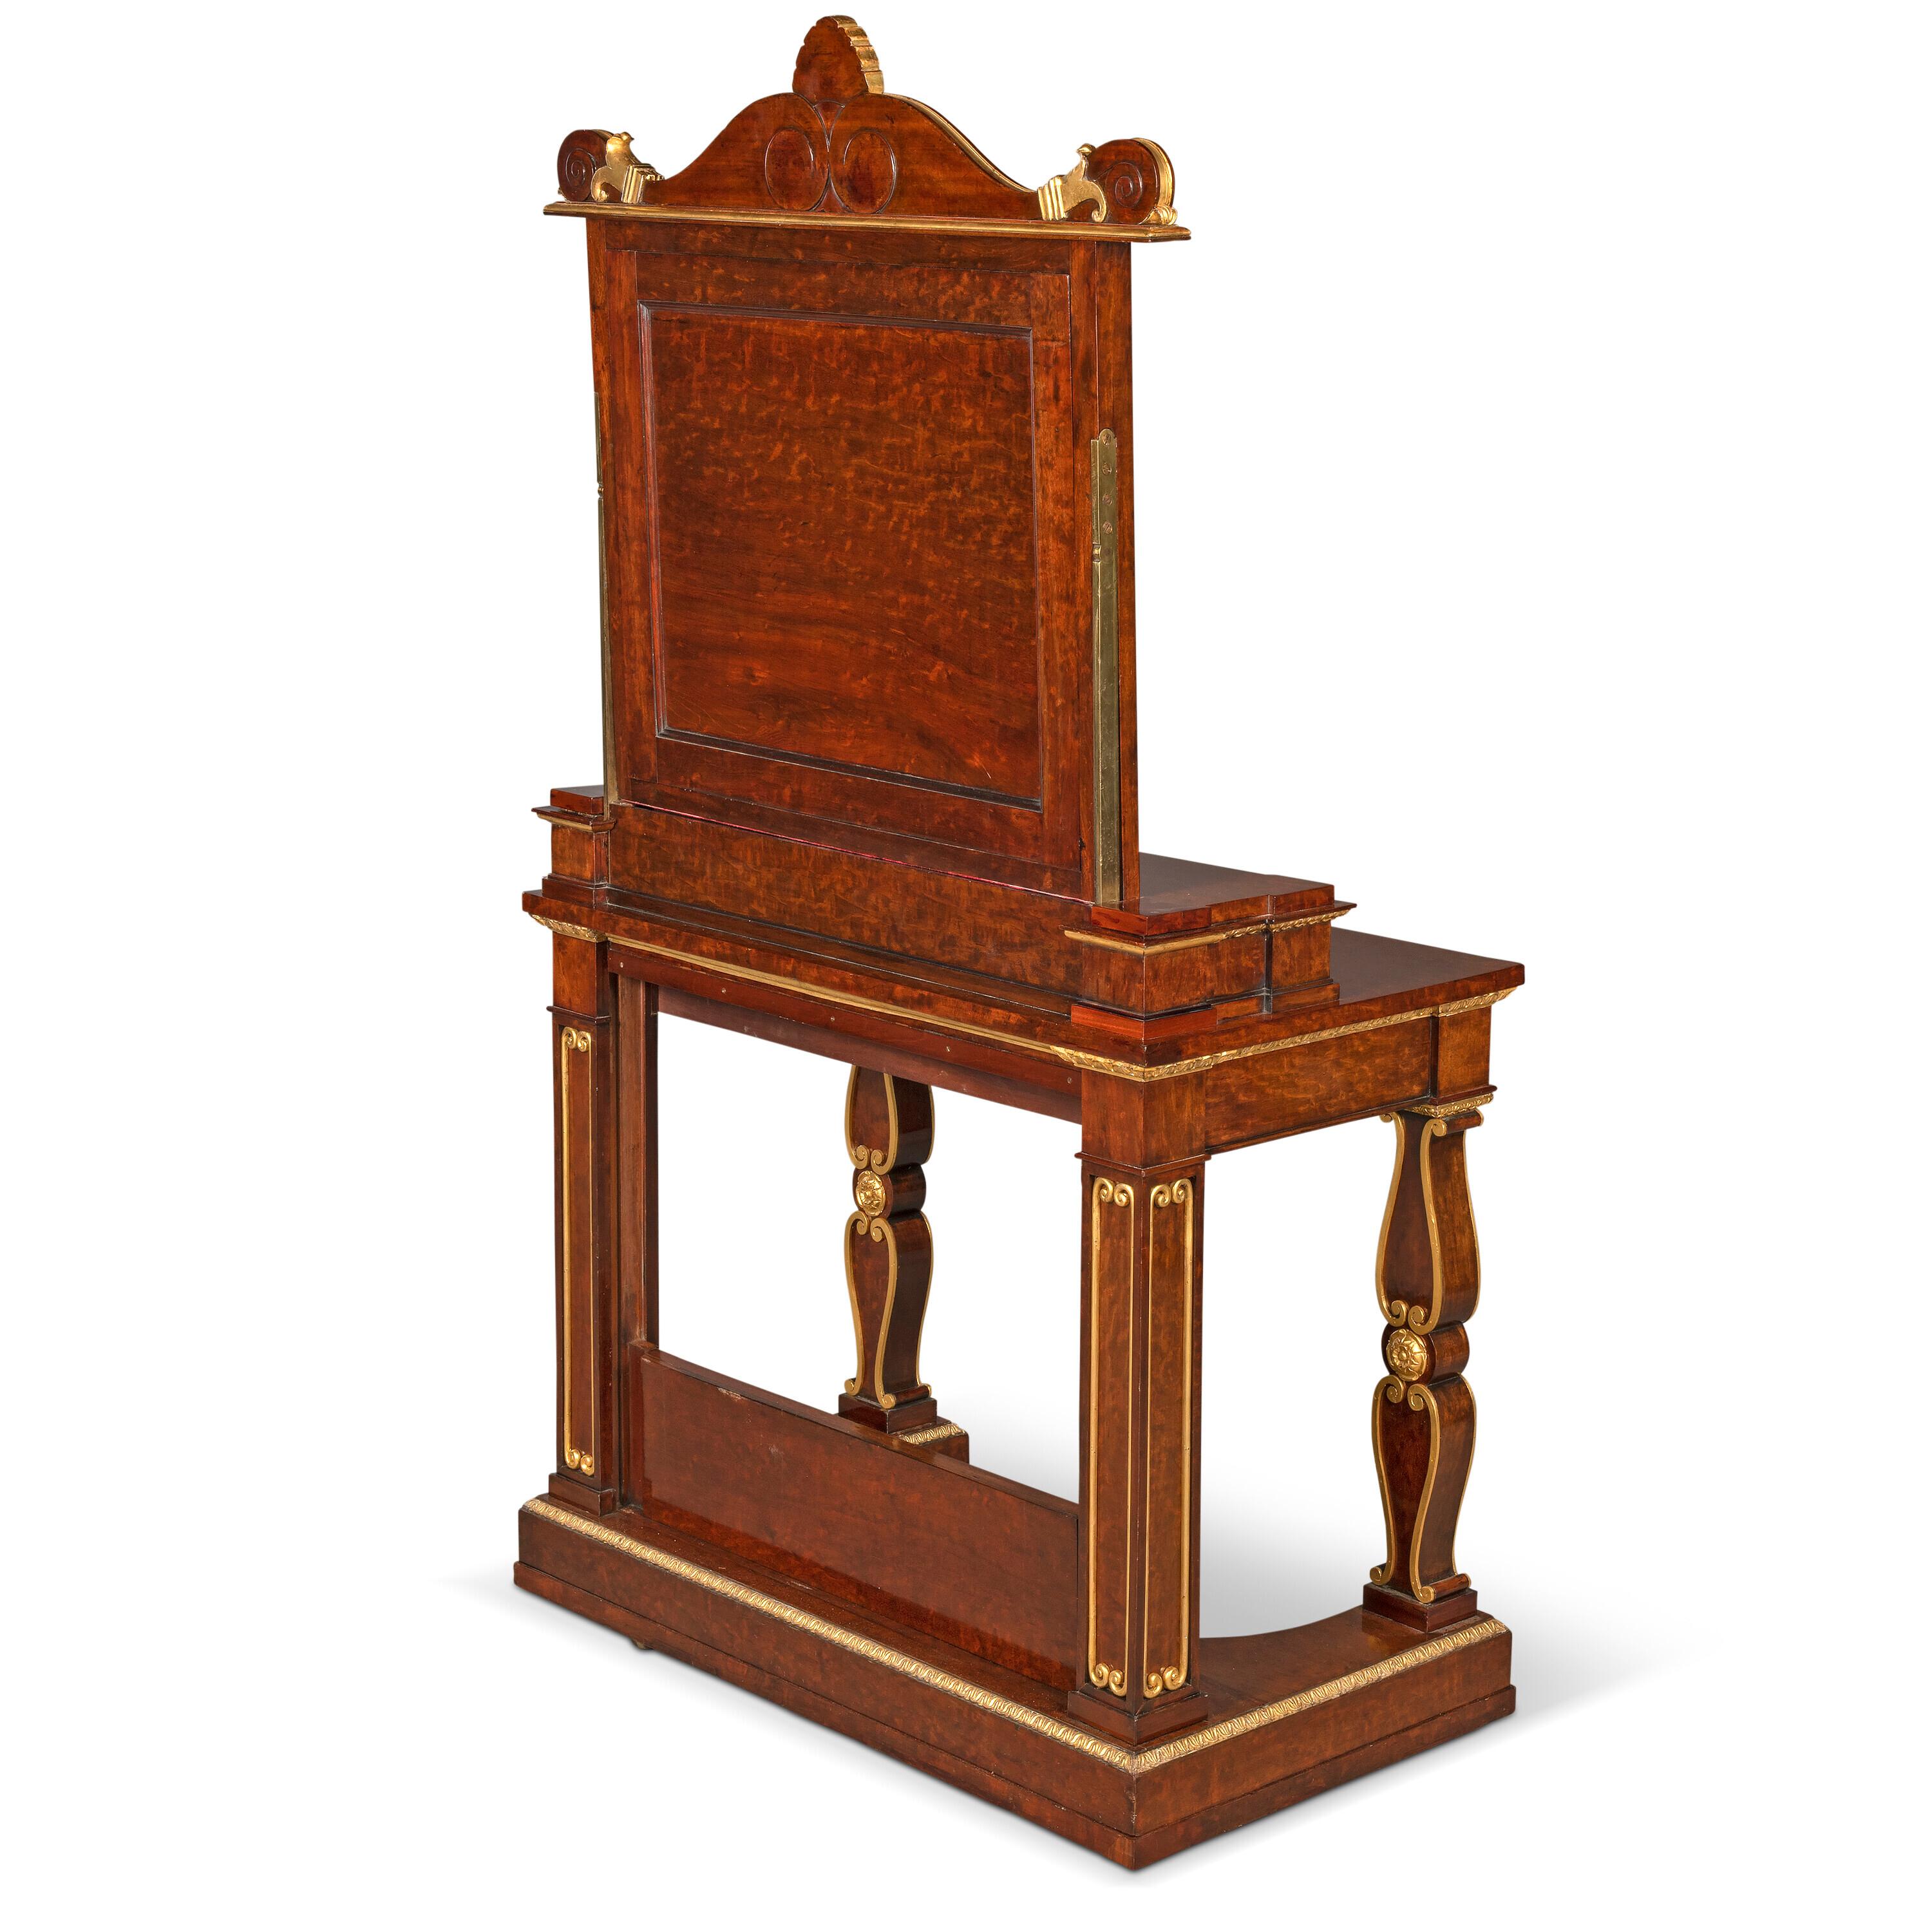 Mahogany  An Exceptional English Regency Dressing Table with a Royal Family Provenance